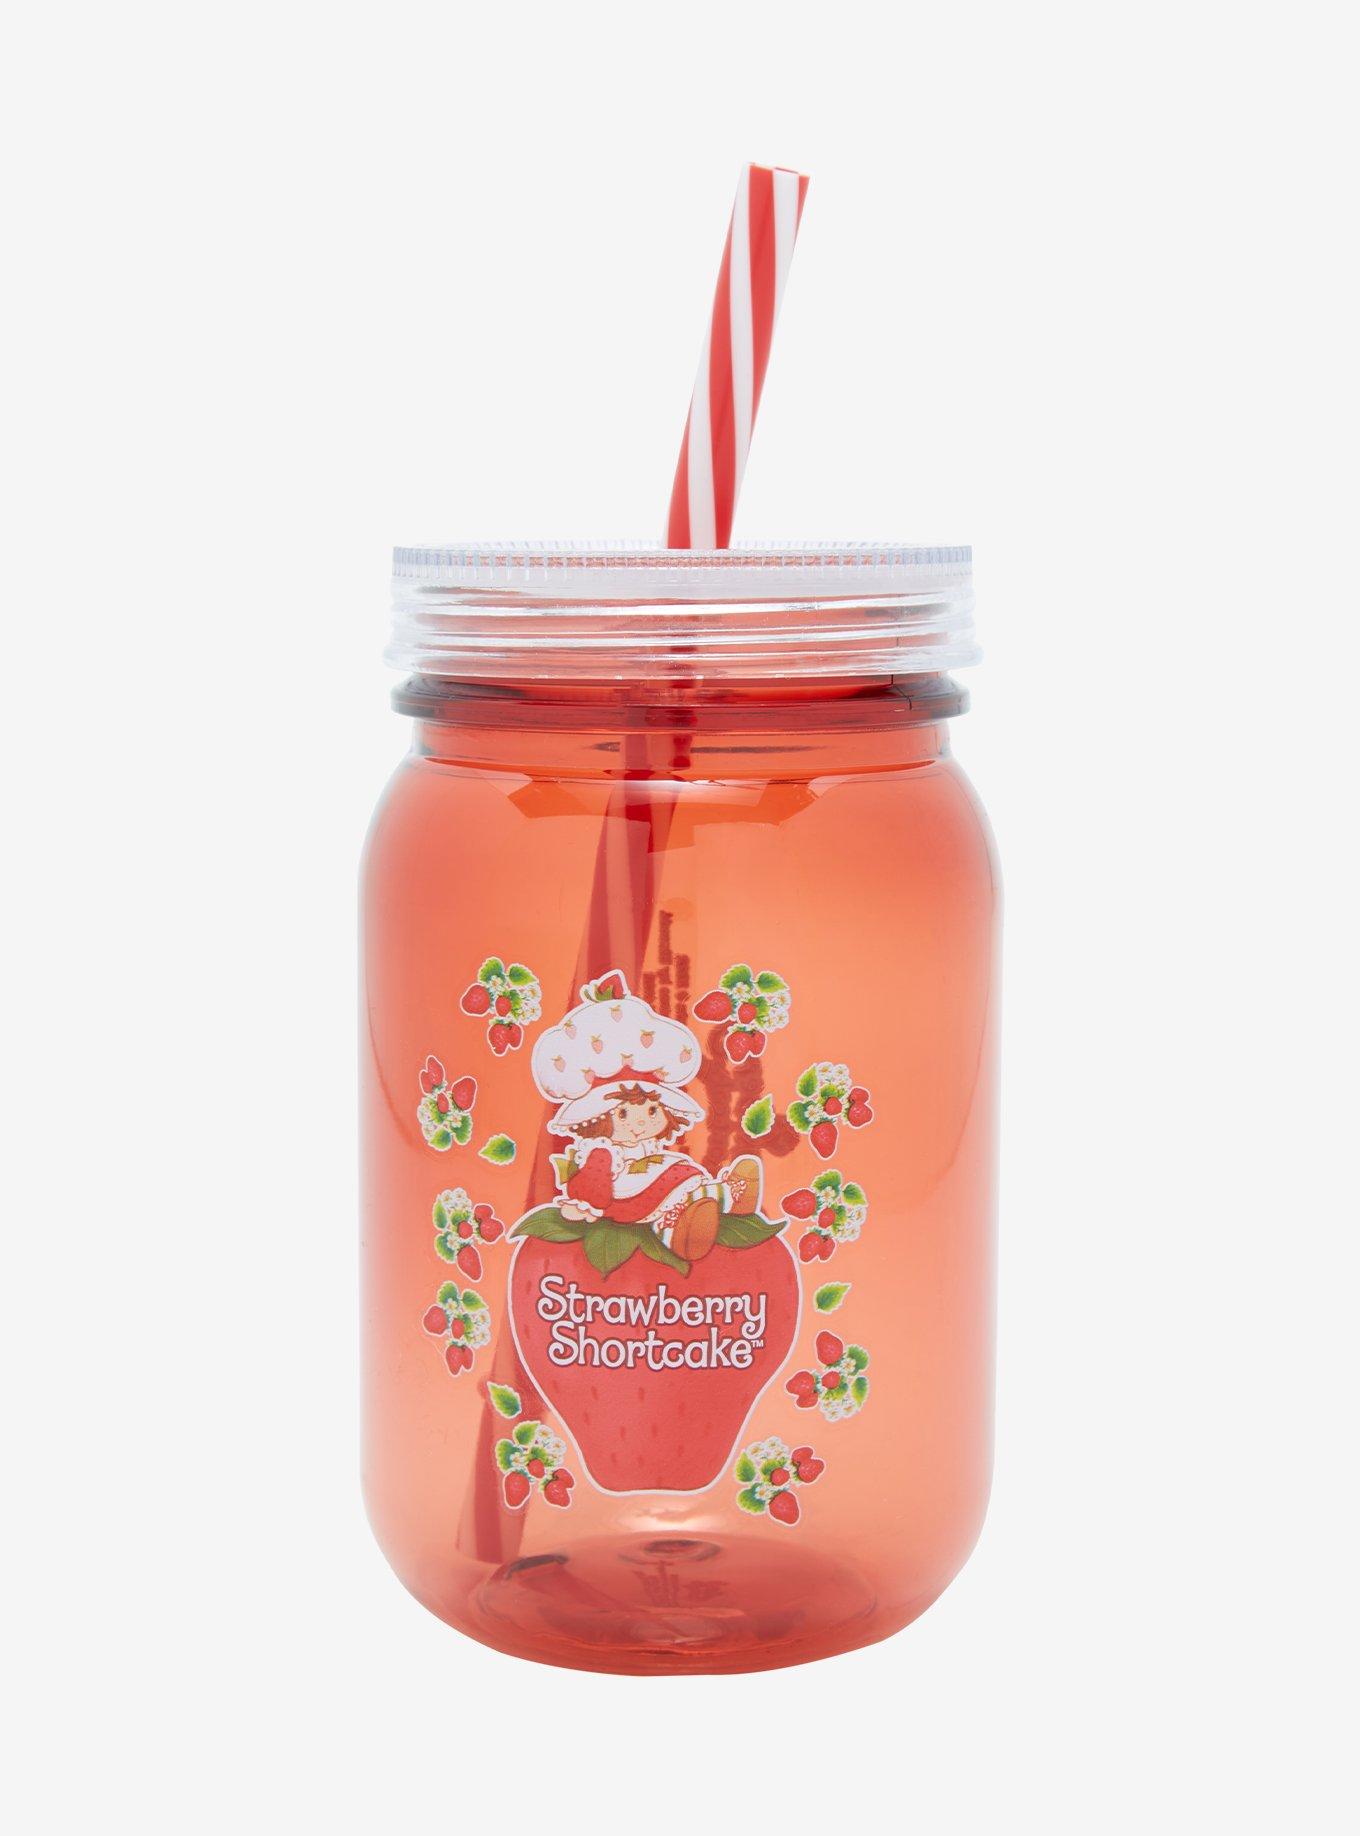 Mason Jars with Lid and Straws | Glasseam Official Site